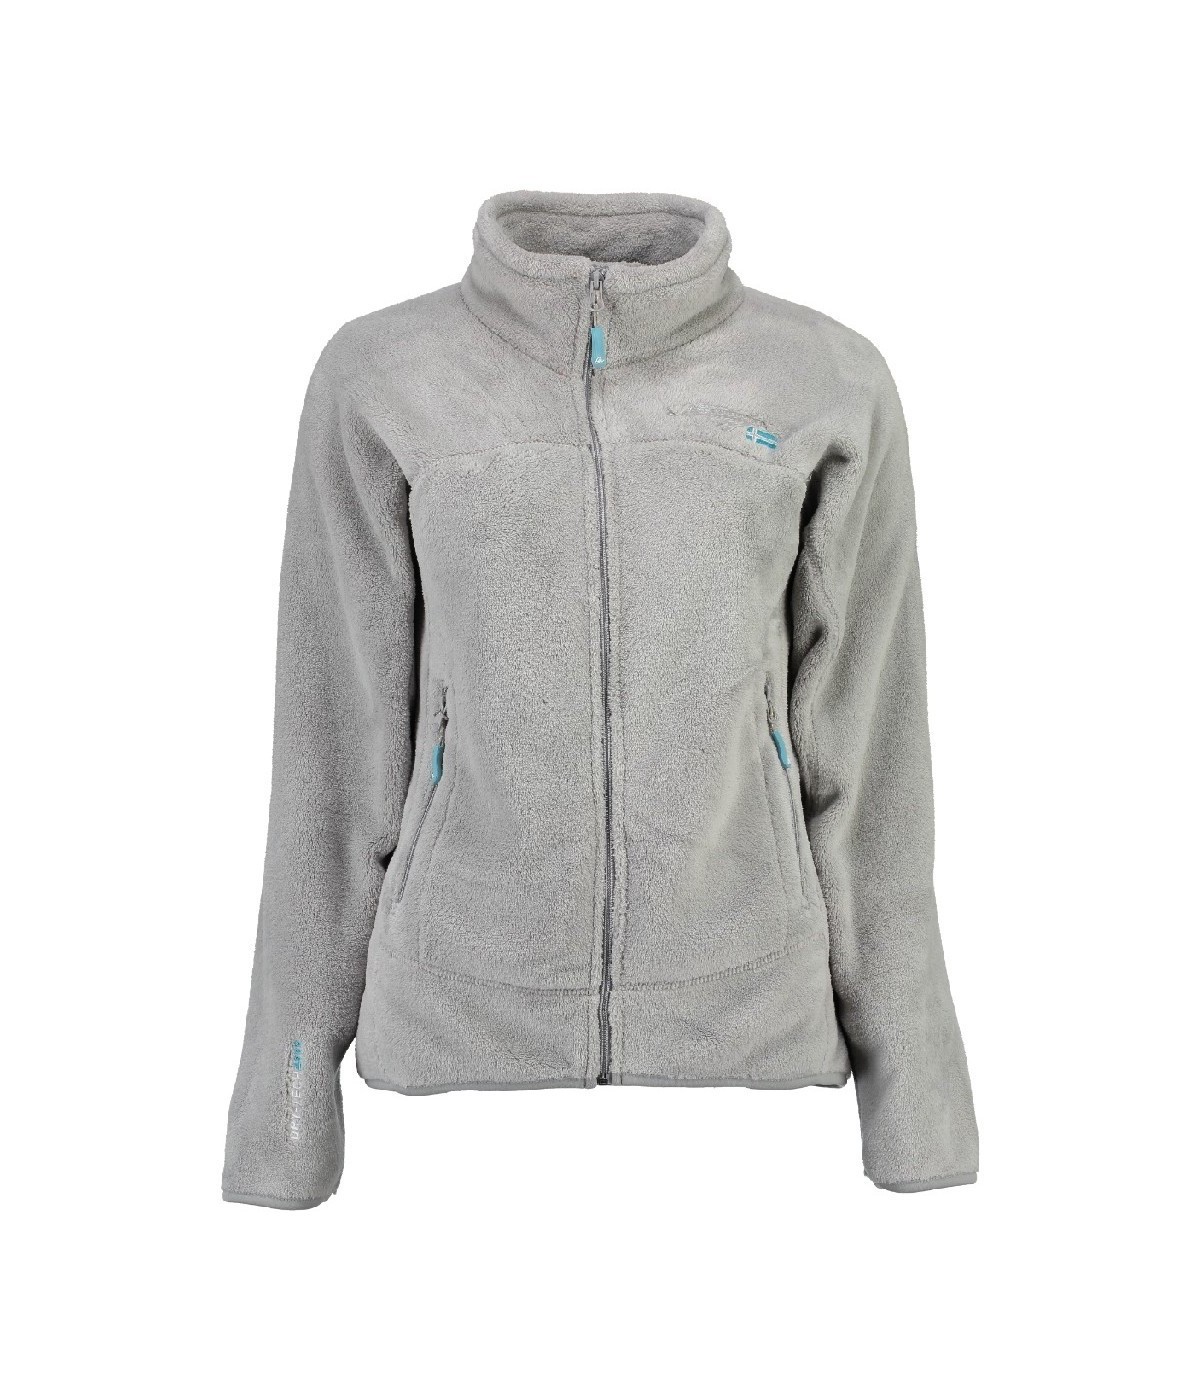 Polaire Femme Geographical Norway Upaline Gris Clair